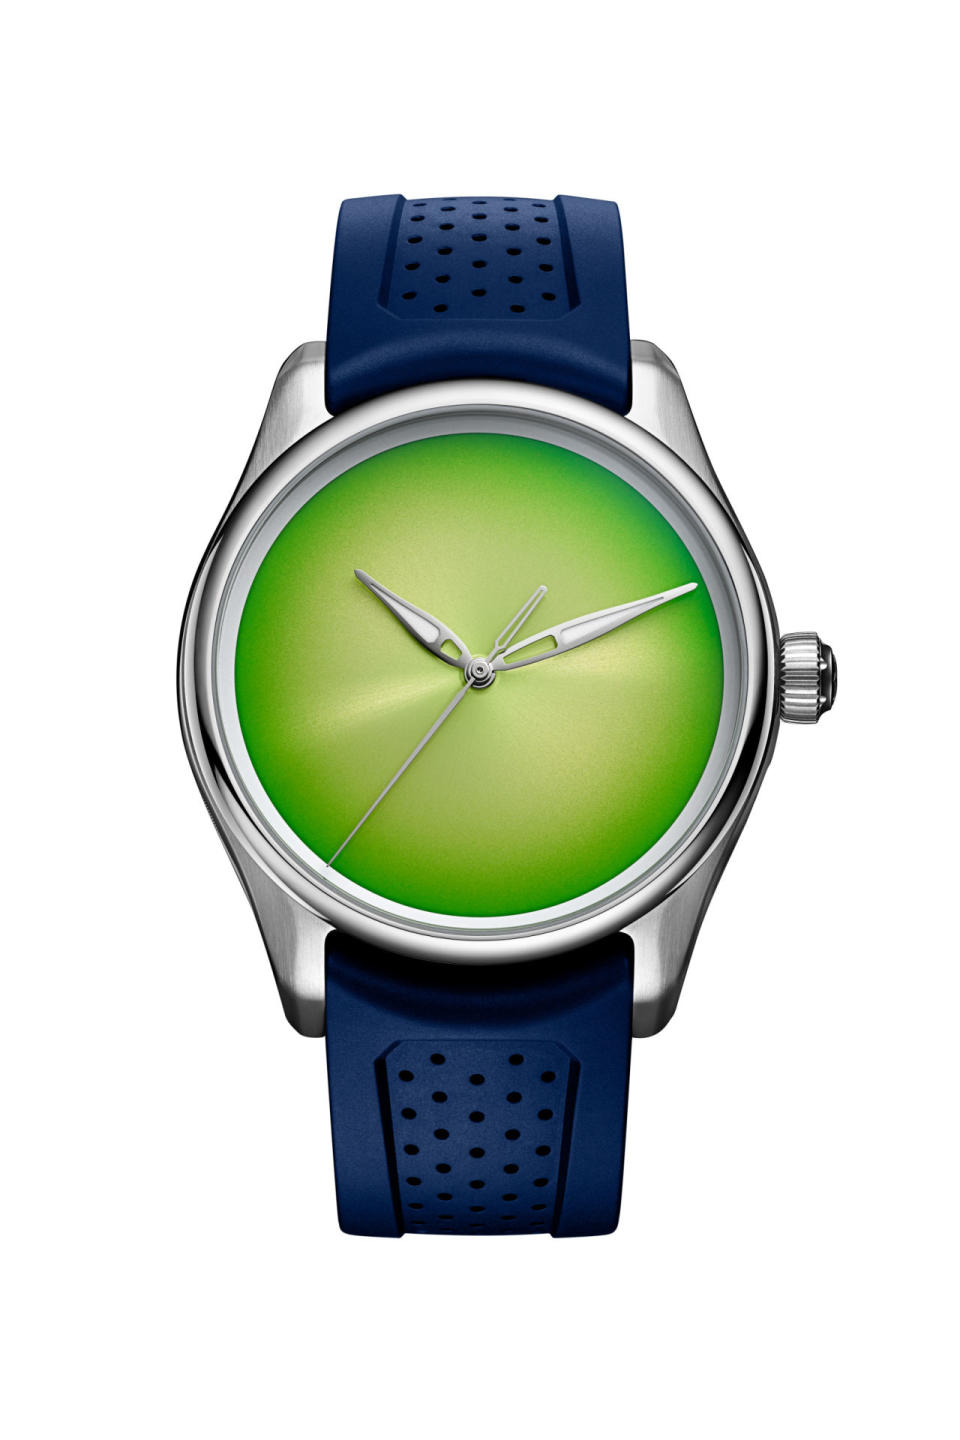 H. Moser & Cie. Pioneer Centre Seconds Concept Citrus Green timepiece - new watch